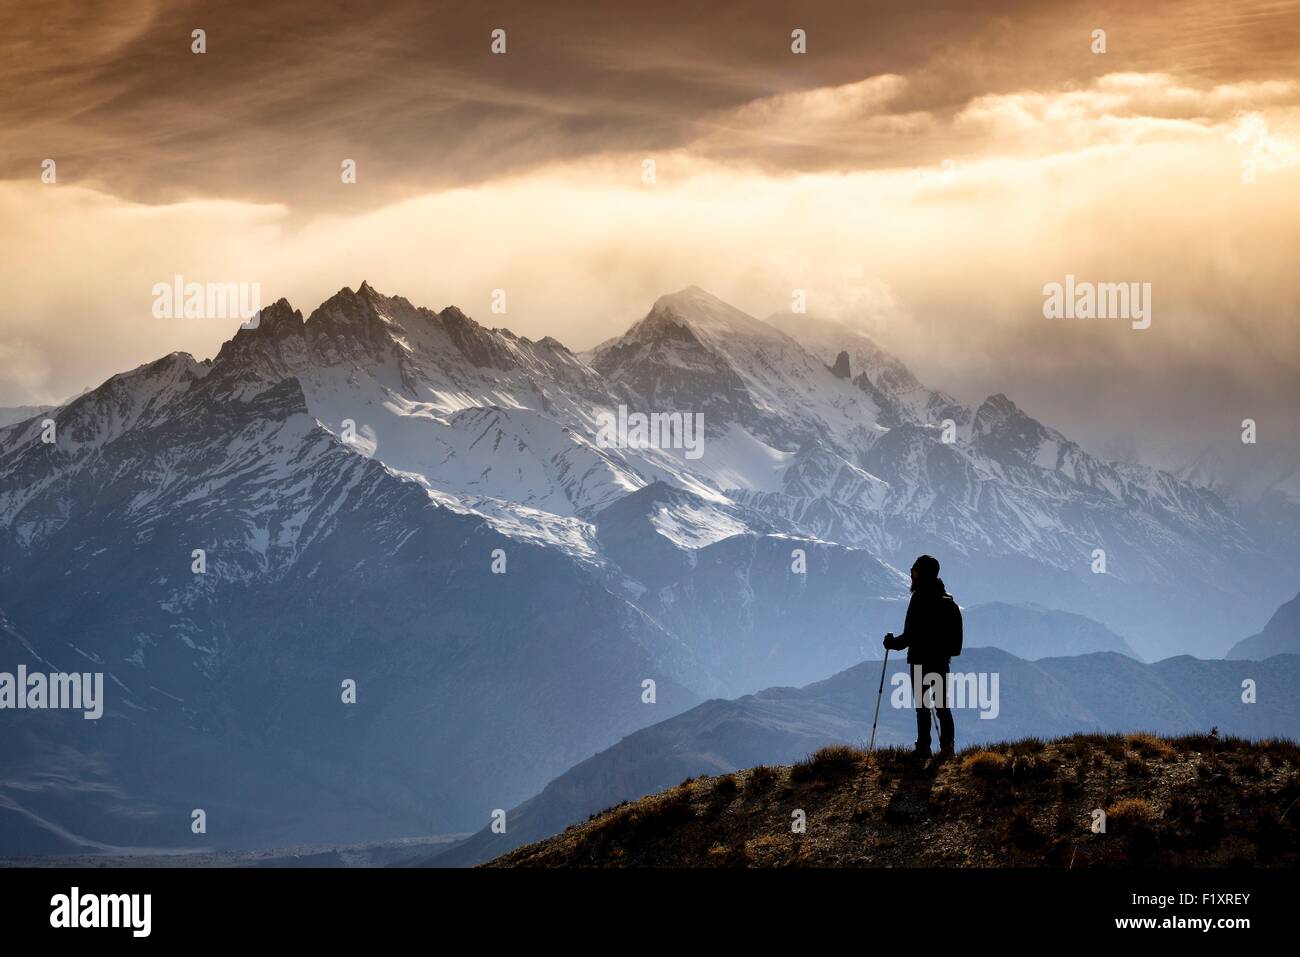 Nepal, Gandaki zone, Upper Mustang (near the border with Tibet), silhouette of a trekker watching the mountains in the evening sun light Stock Photo